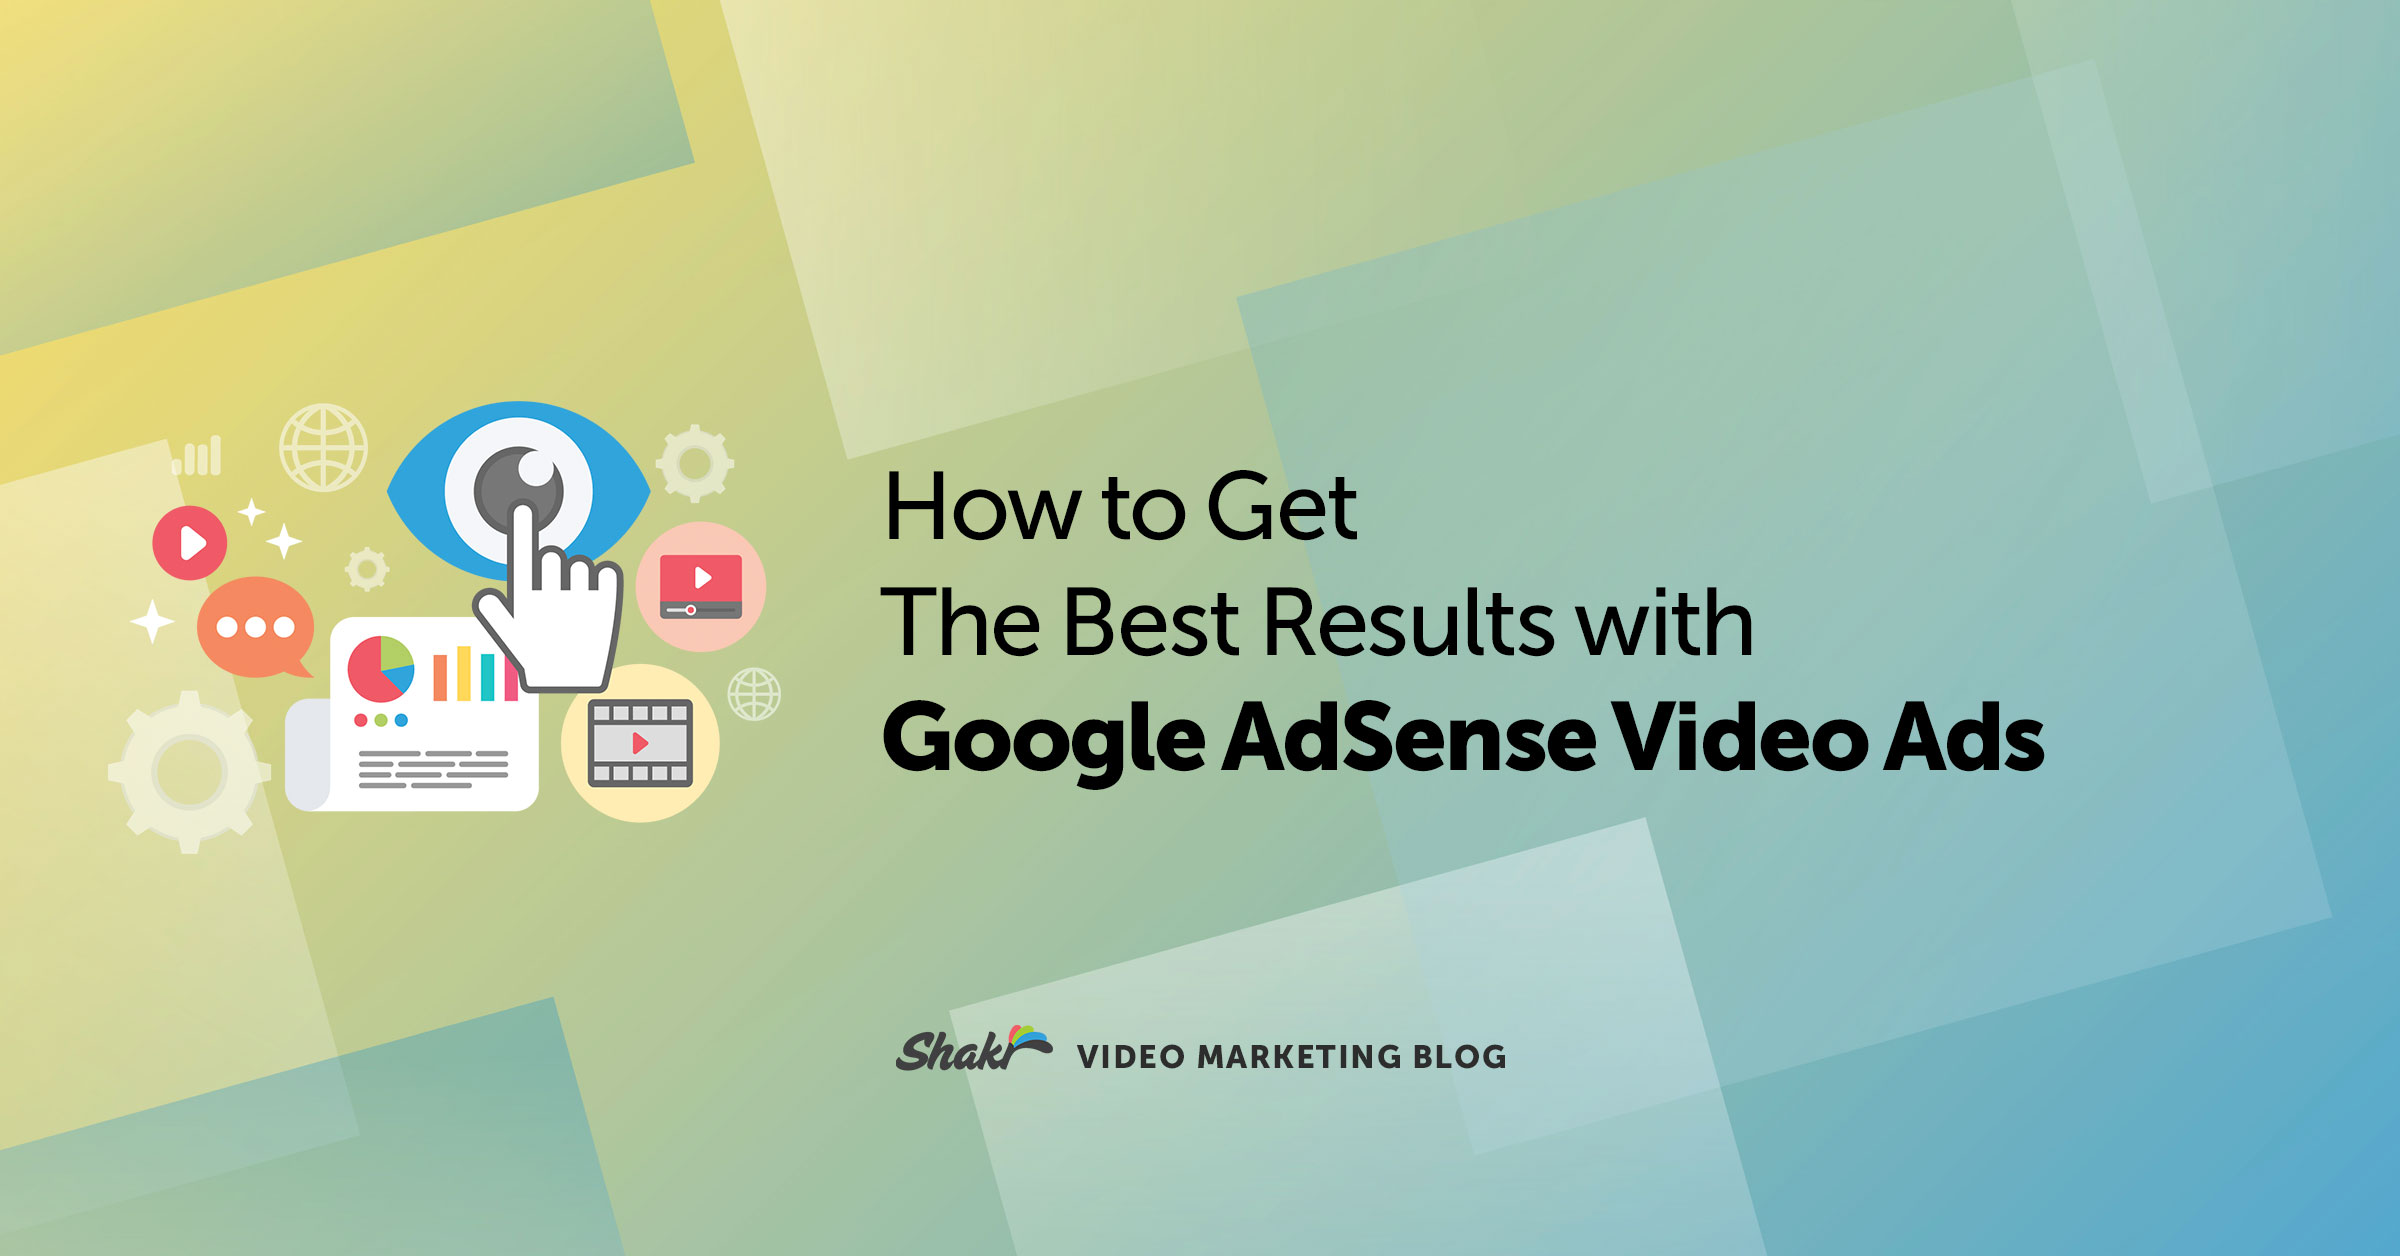 How to Get The Best Results with Google AdSense Video Ads Shakr Video Marketing Blog